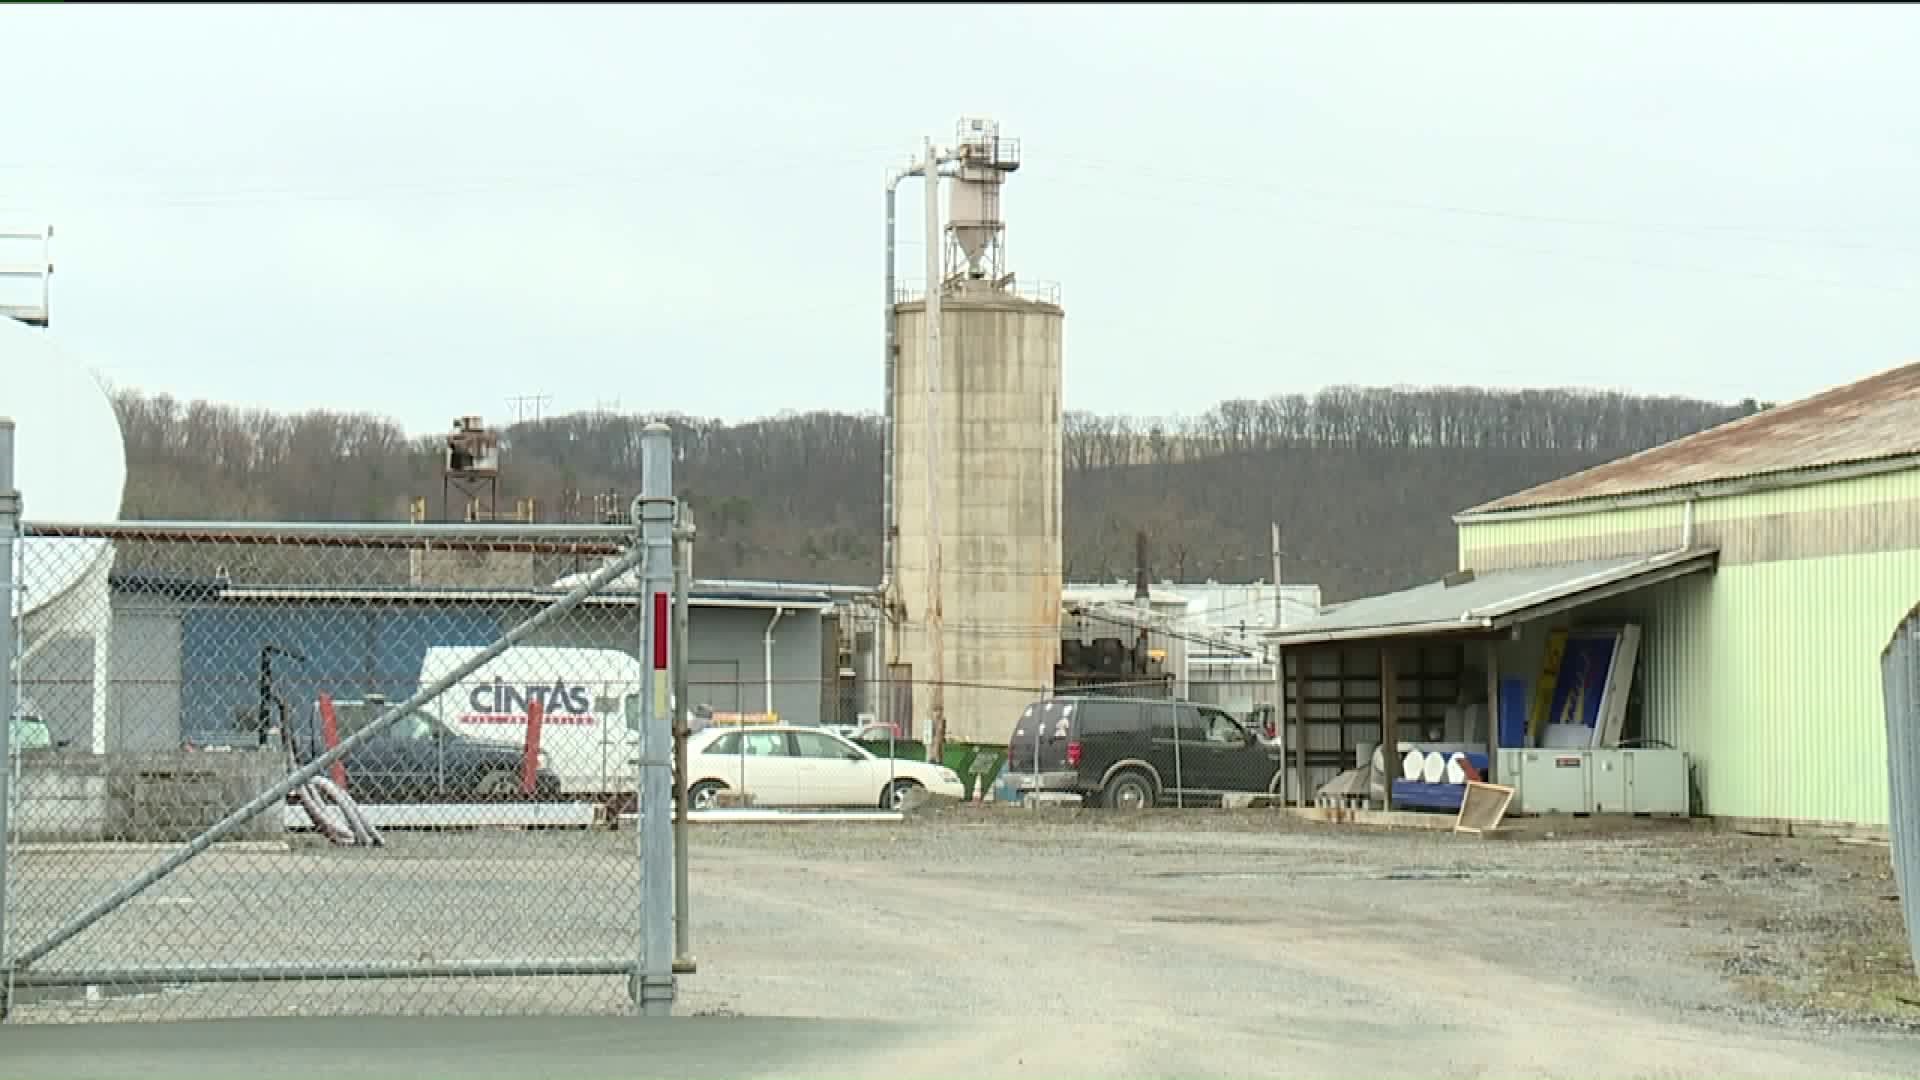 Luzerne County Business Catches Fire for Second Time